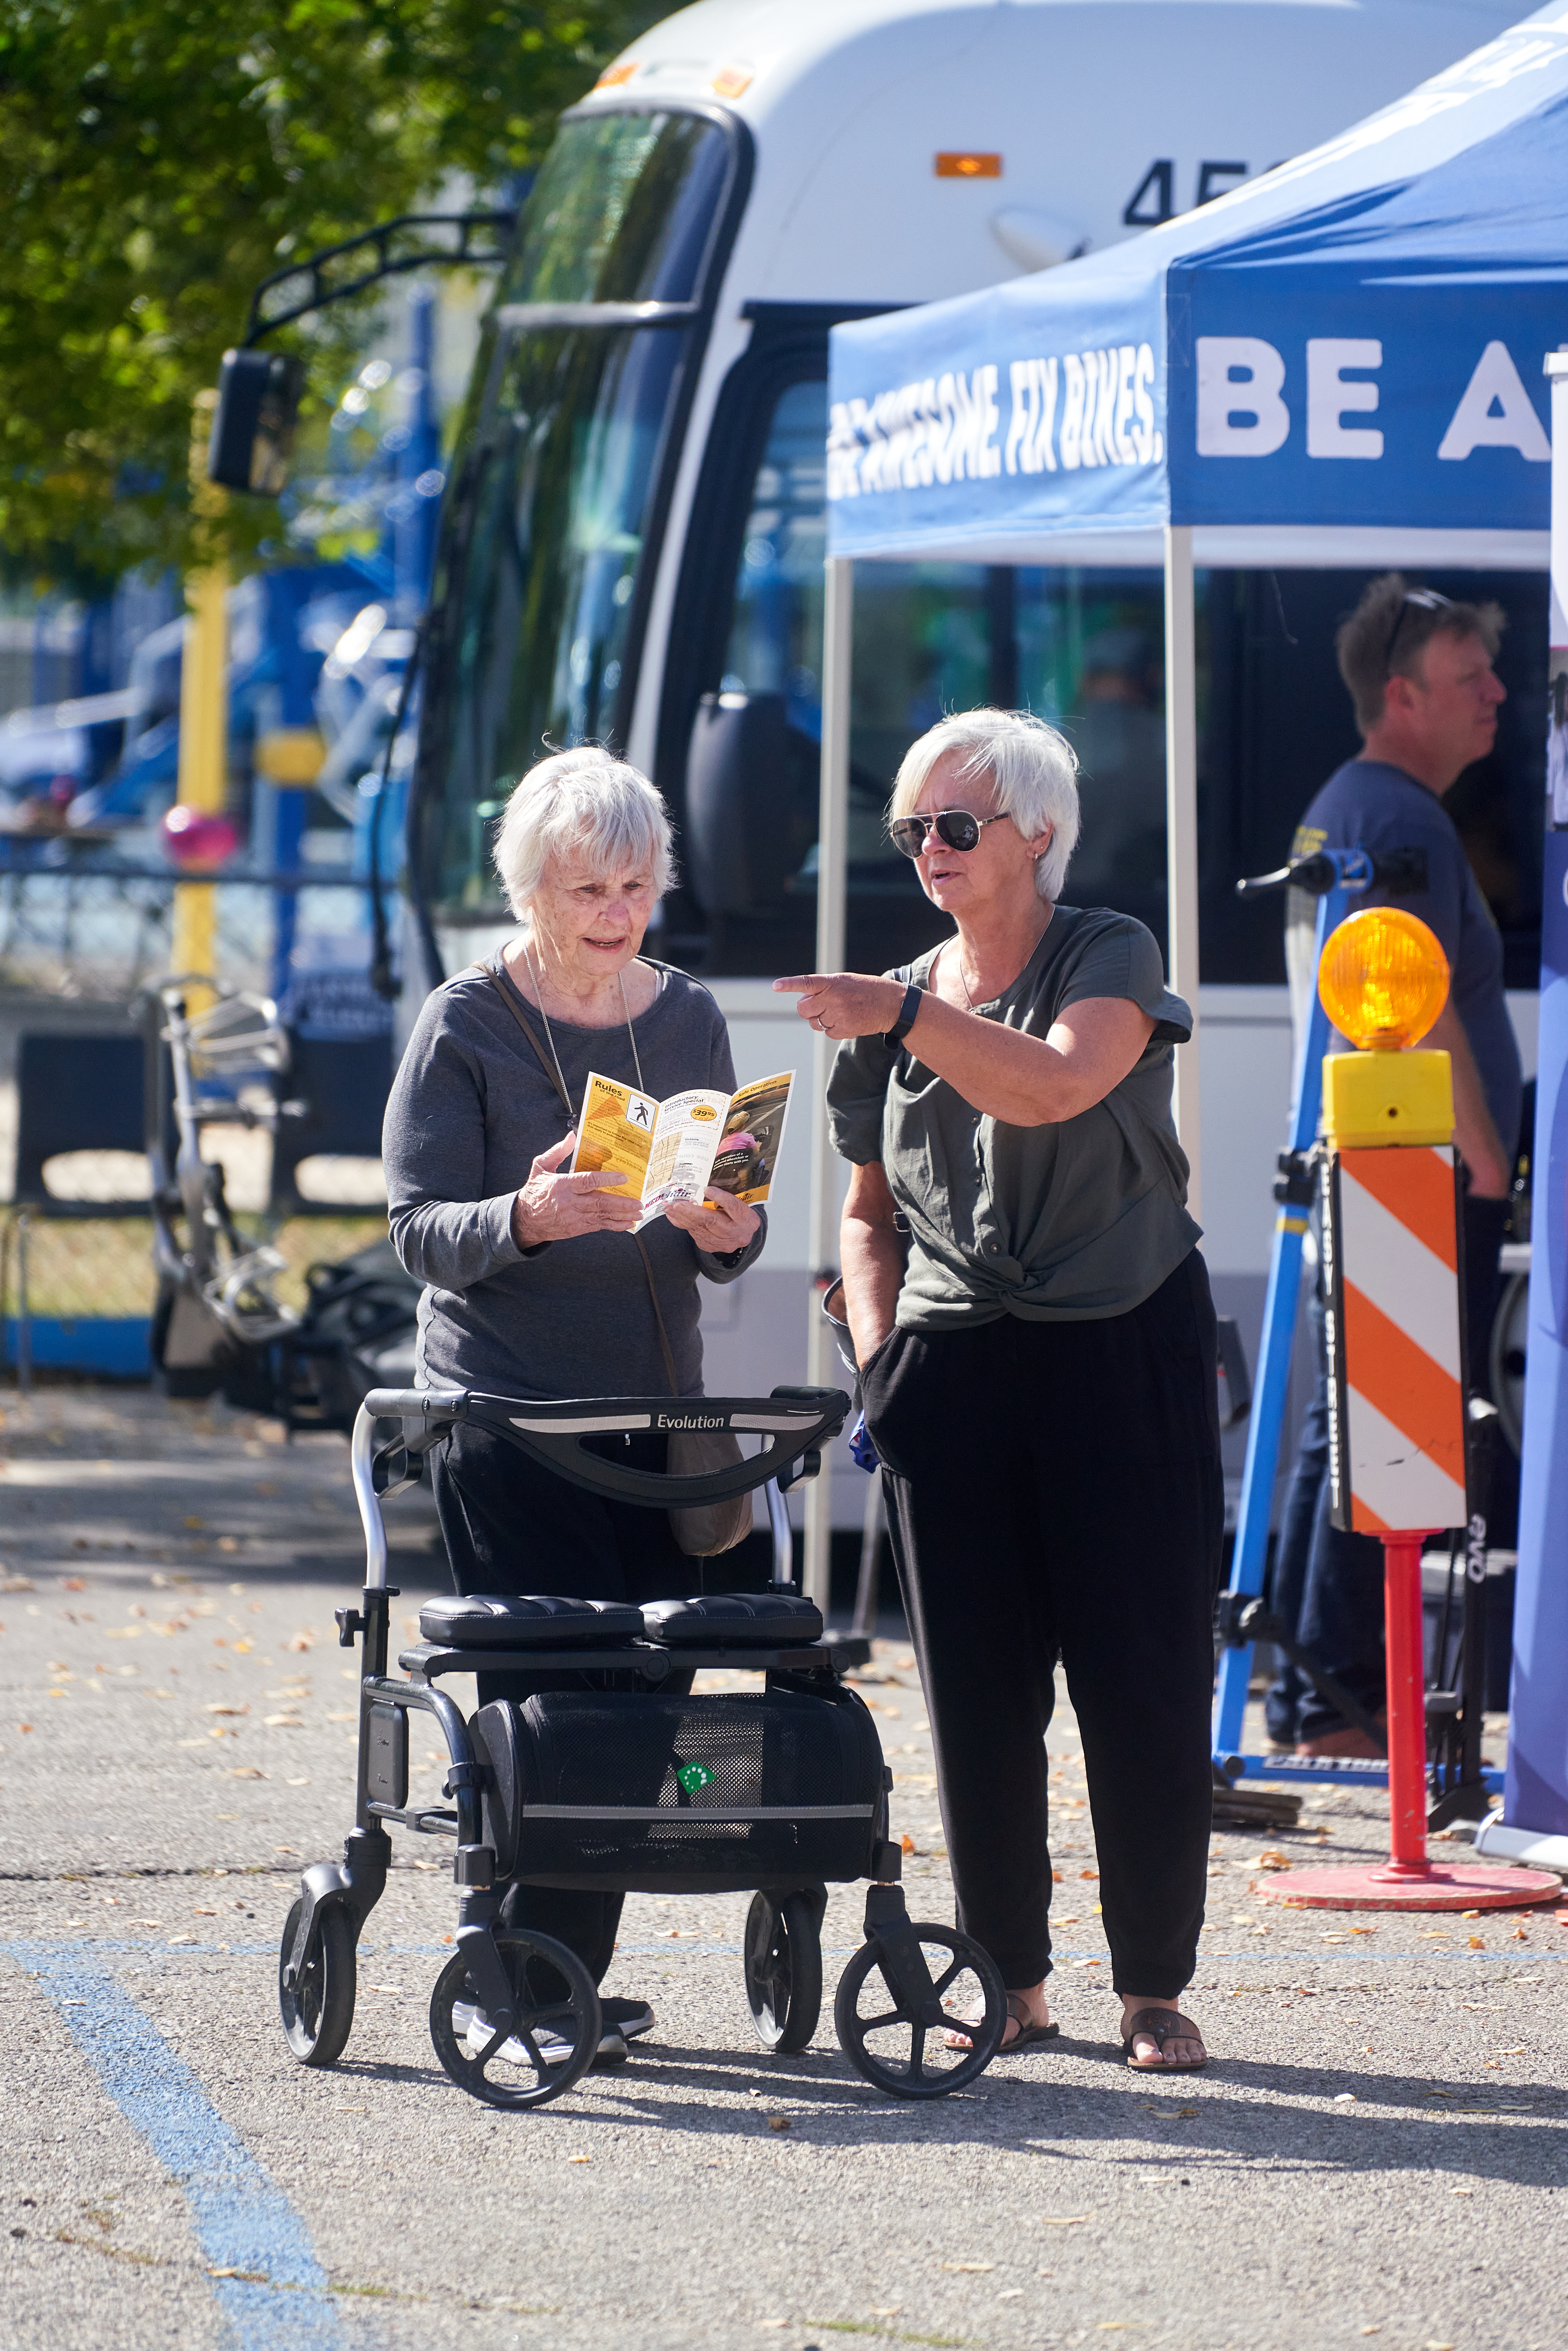 Two people stand in front of a bus during a mobility fair for older adults.